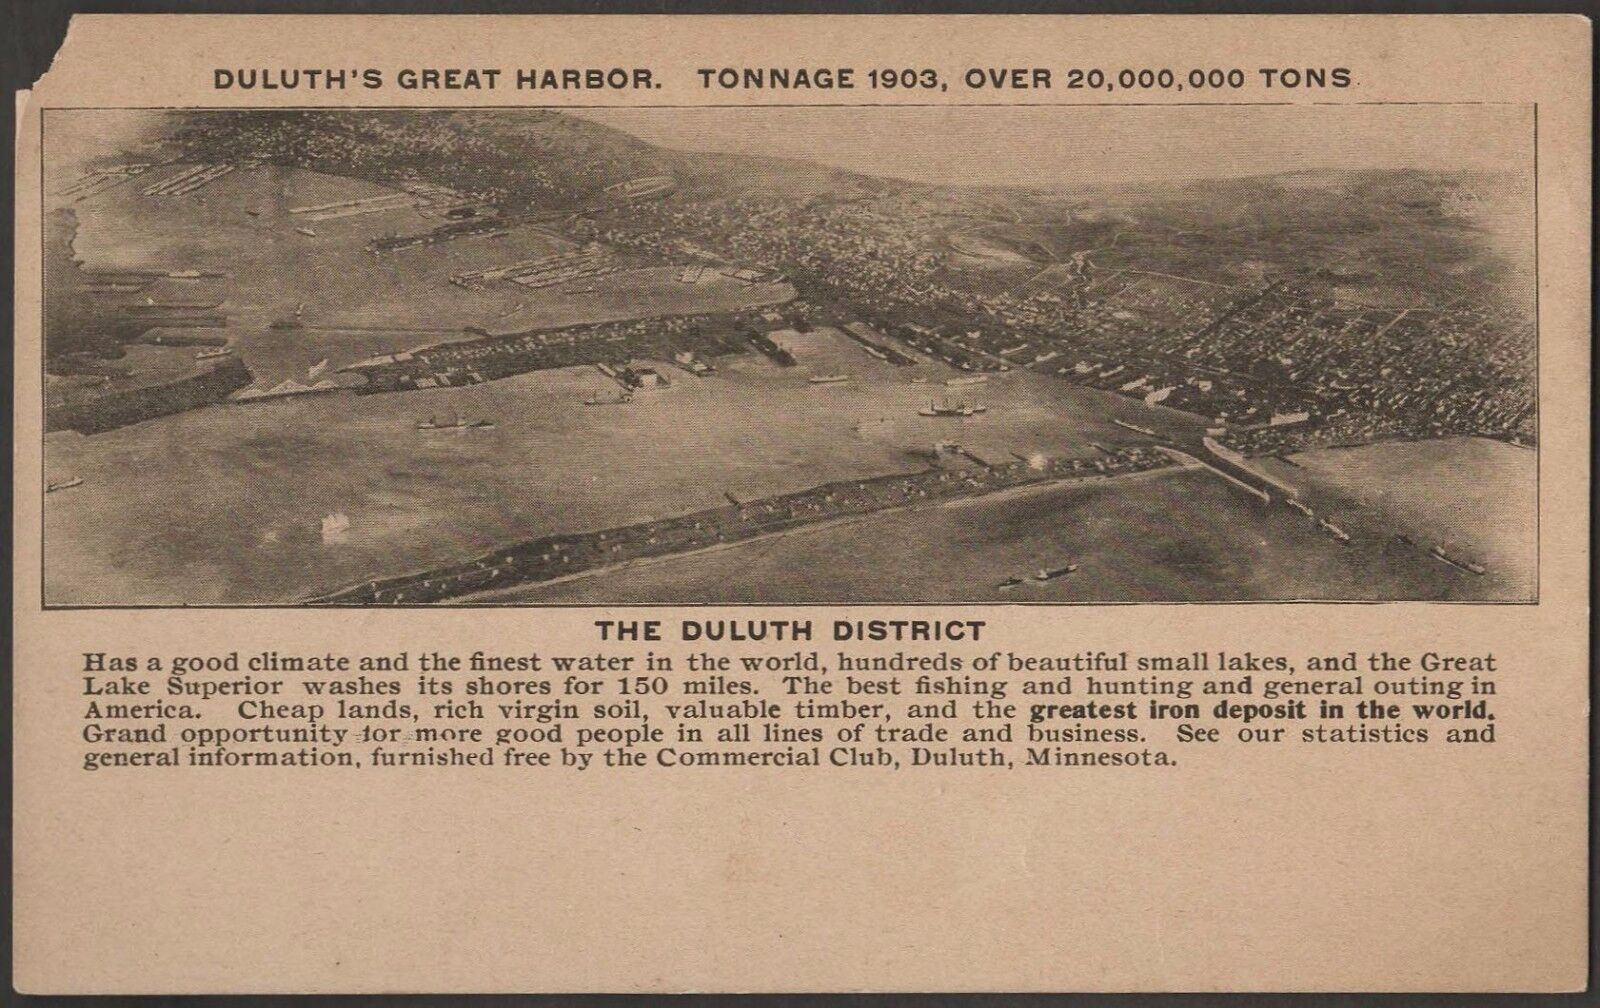 UDB Duluths\'s Great Harbor Tonnage 1903 Over 20,000,000 Tons Pre 1907 Postcard